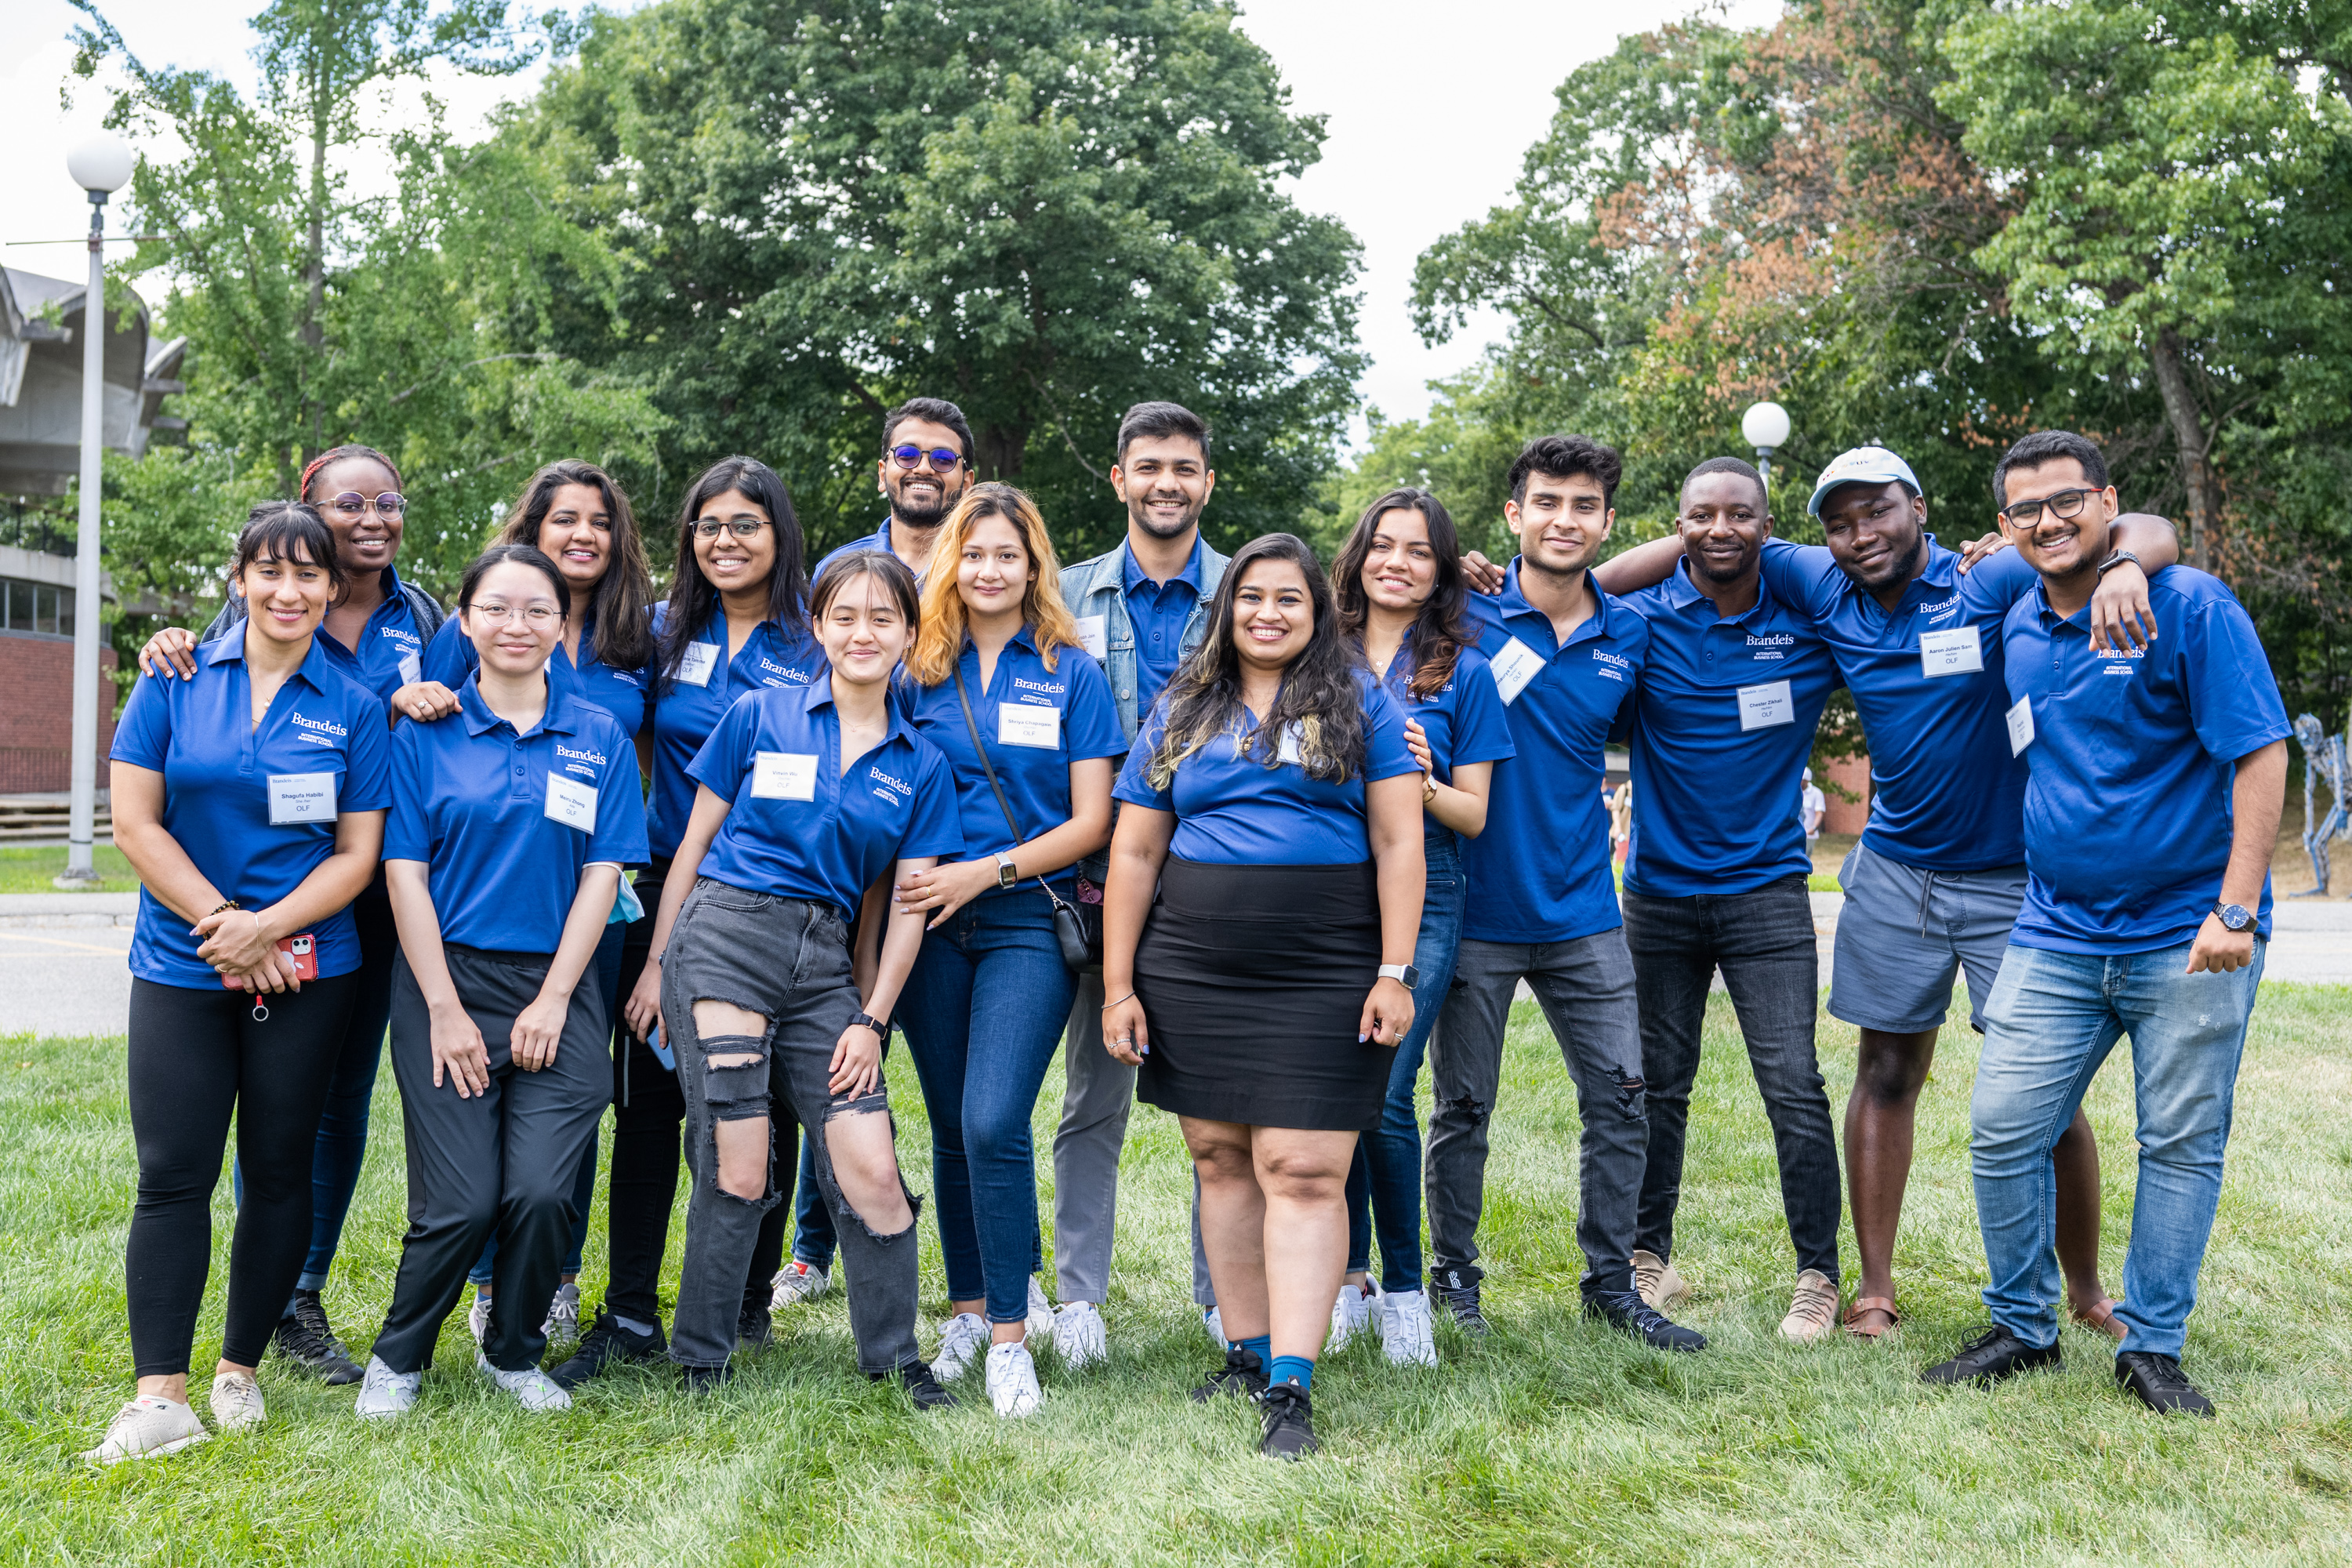 The Brandeis International Business School Leadership Fellows will help you feel right at home.